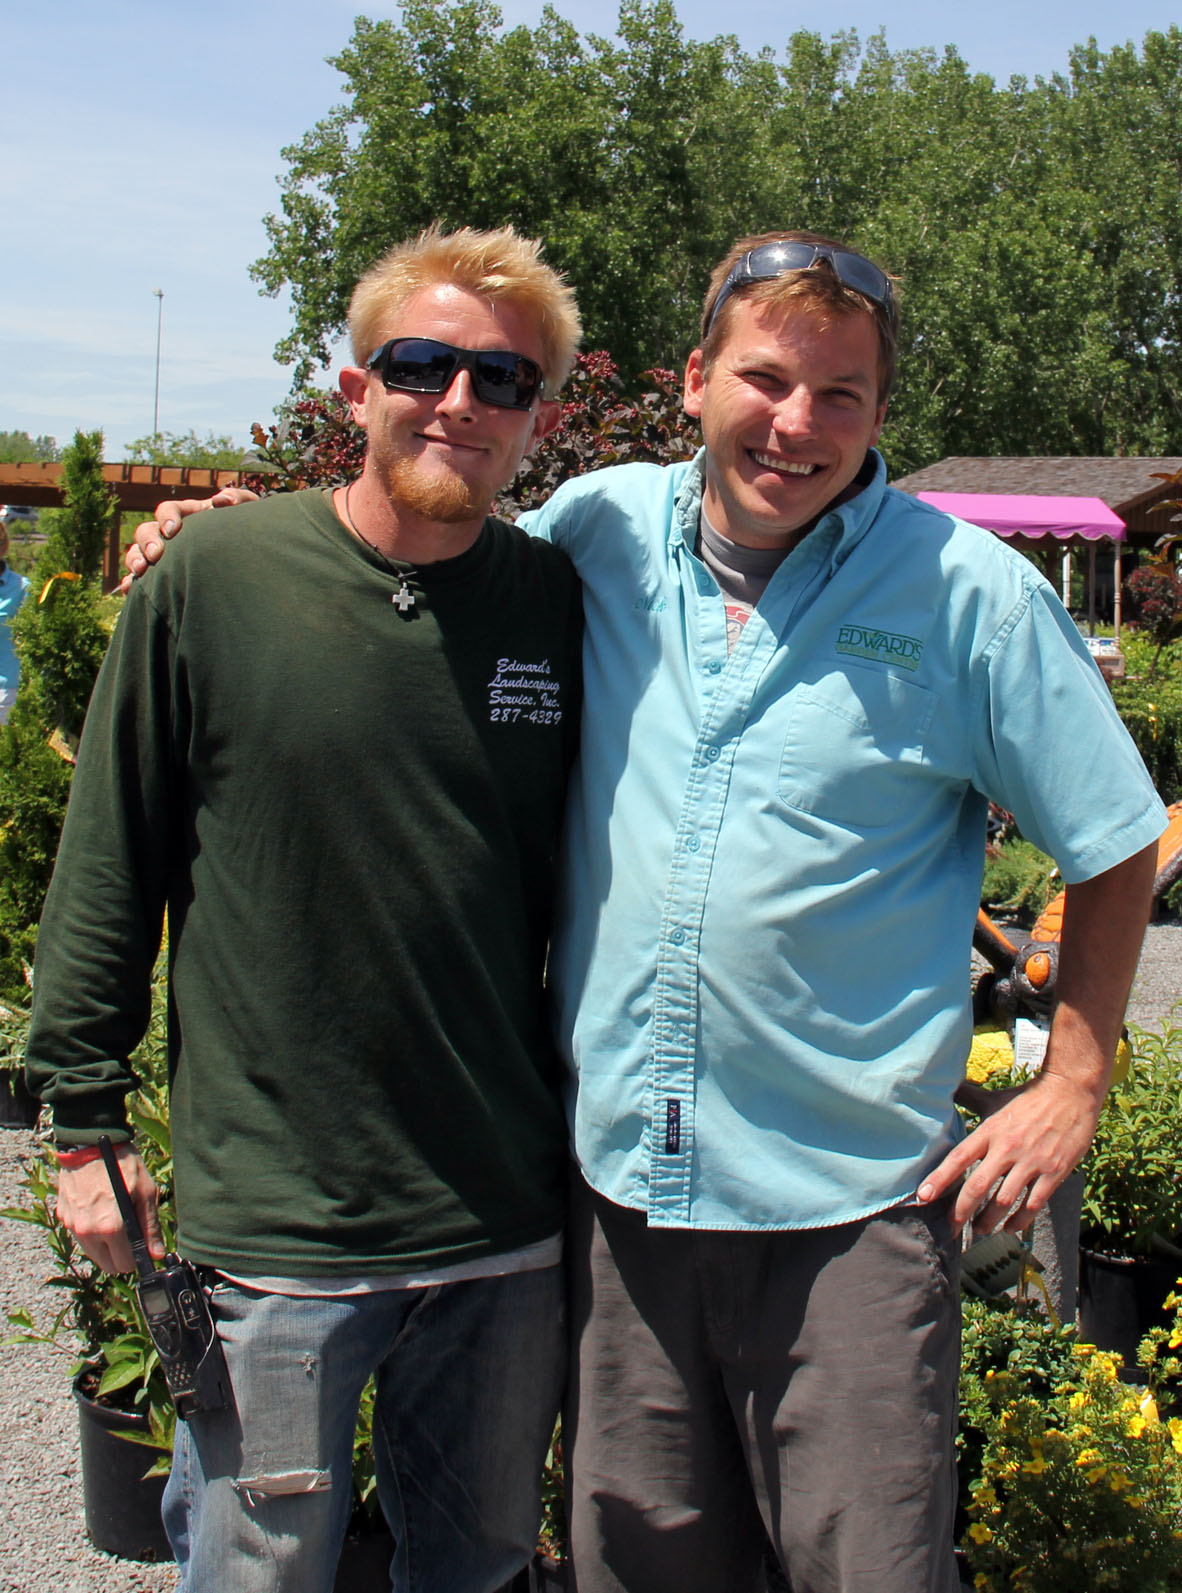 Edward's Garden Center has experienced & friendly staff members that are always happy to help.